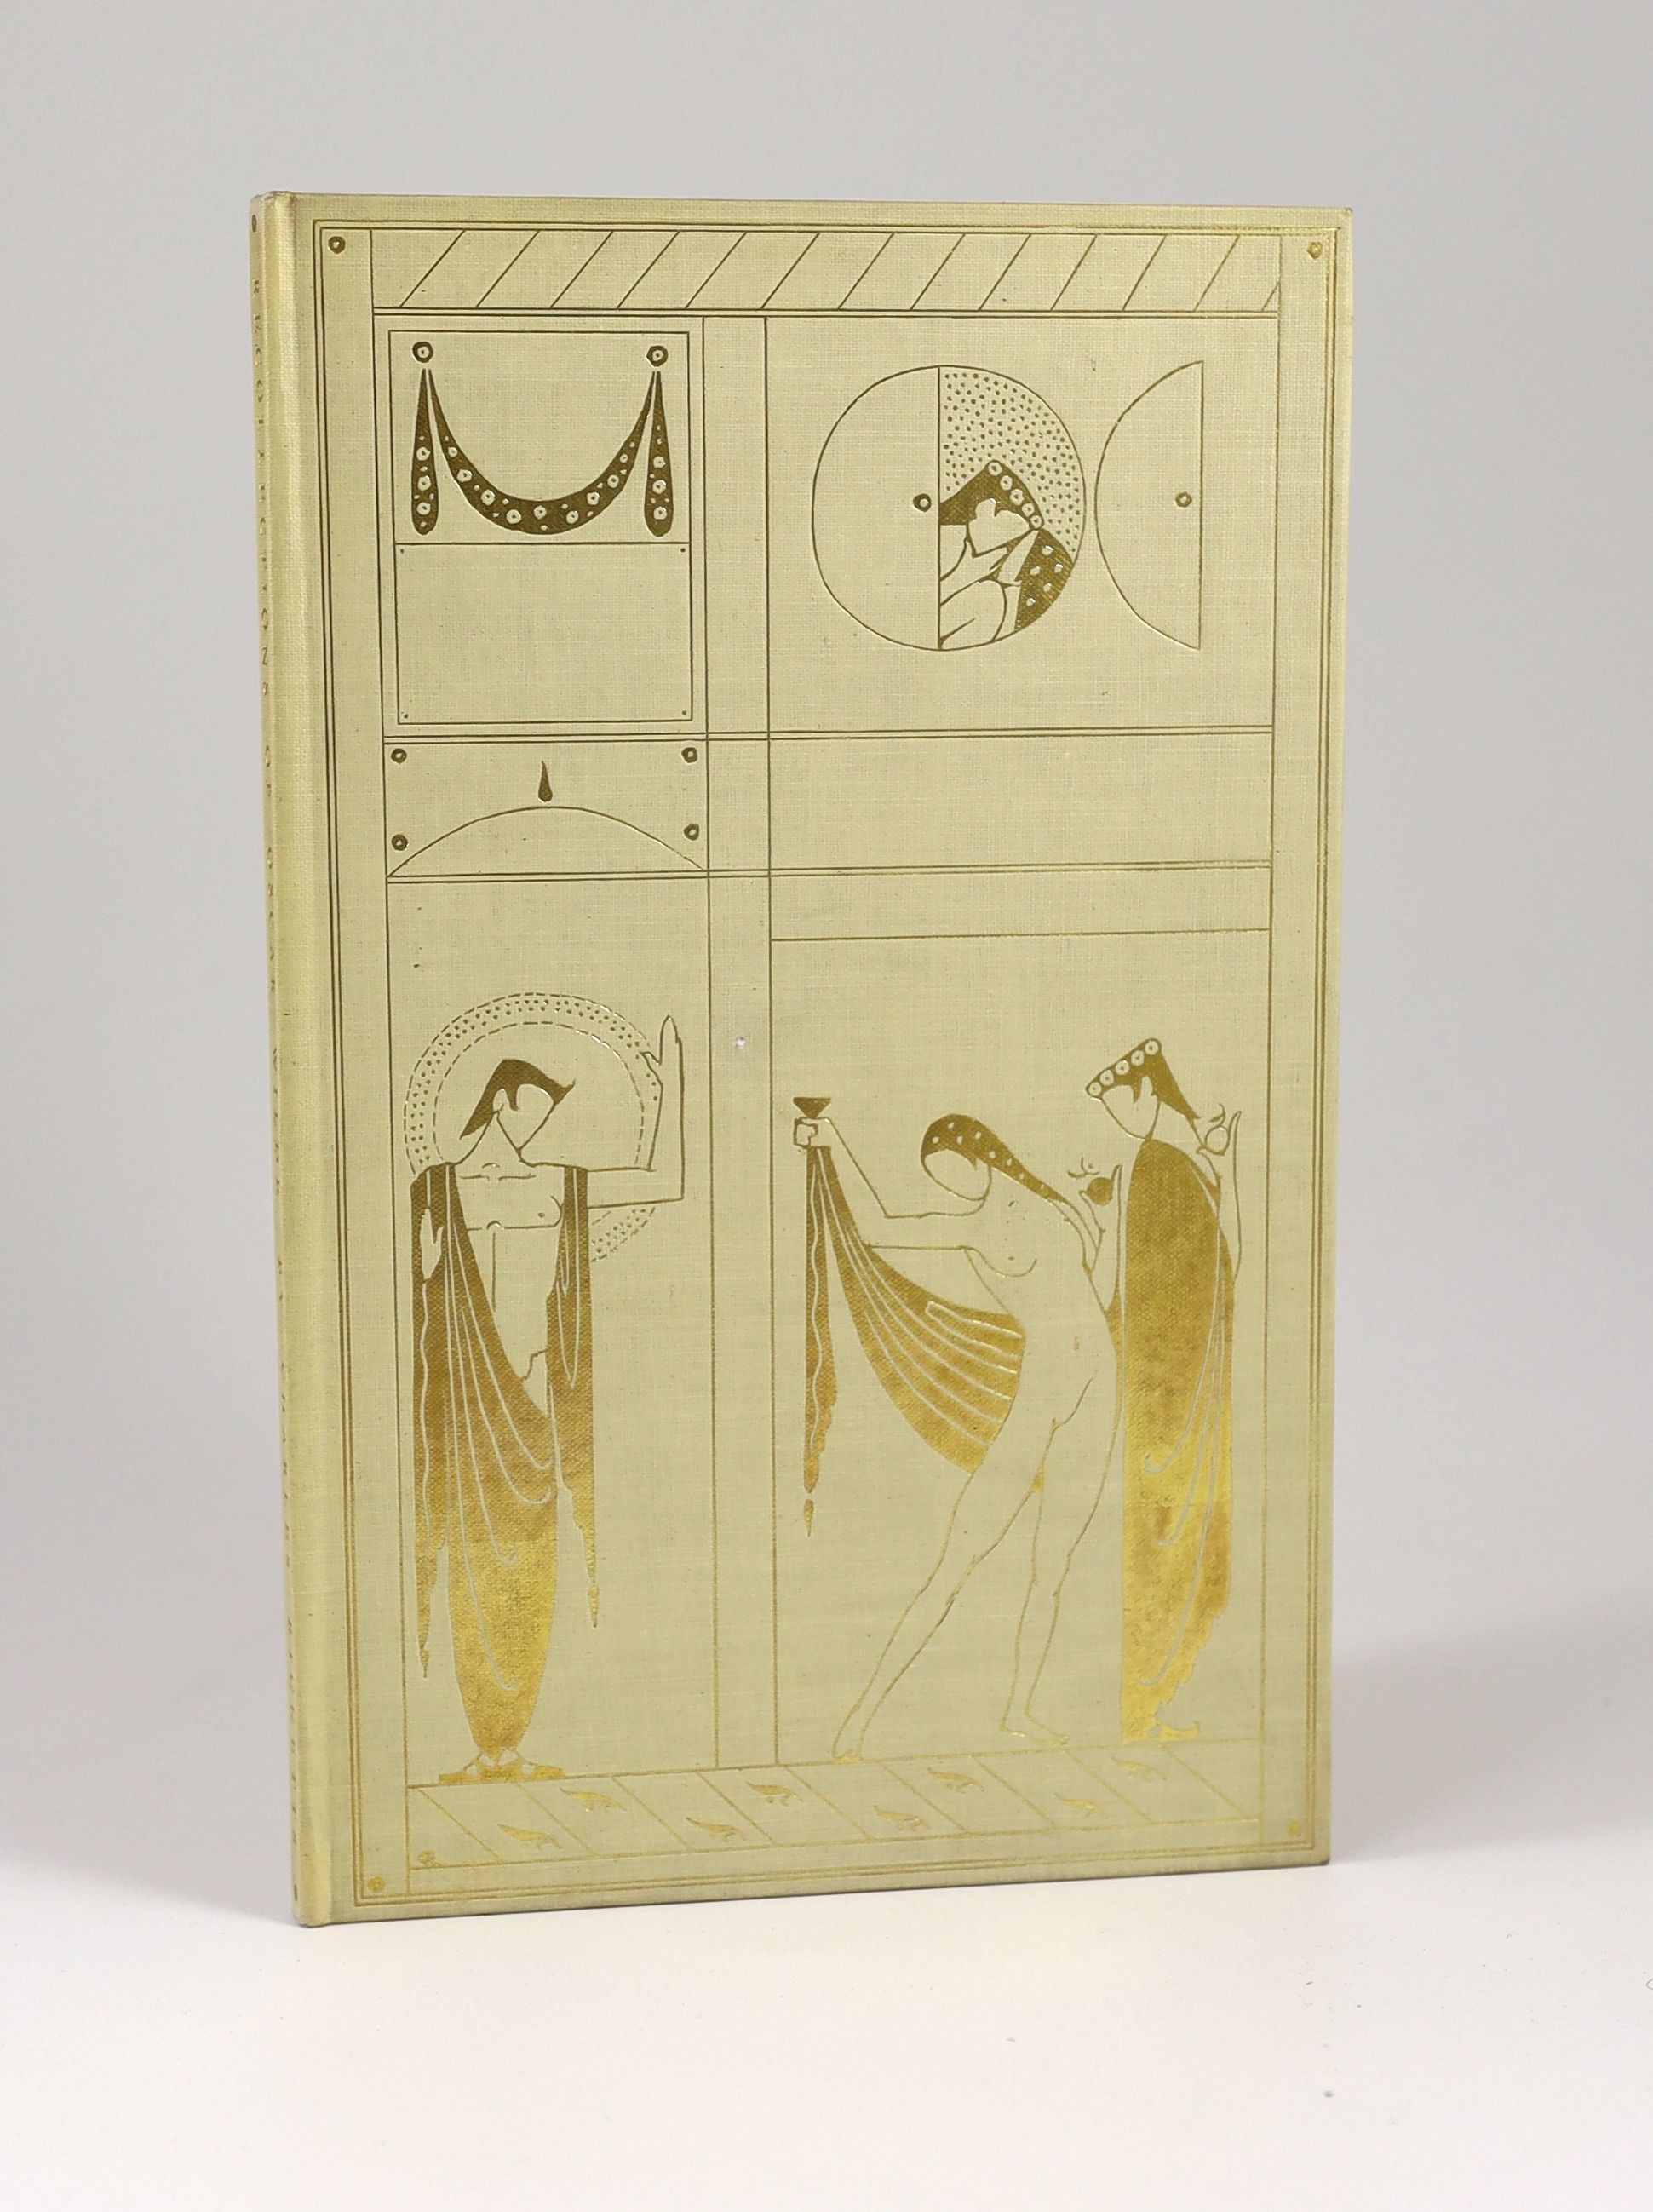 Nonesuch Press - ‘’Raymond, Jean Paul’’ and Ricketts, Charles de Sousy - Recollections of Oscar Wilde, one of 800, 4to, gilt decorated cream buckram, after a design by Charles Ricketts, with black d/j, London, 1932